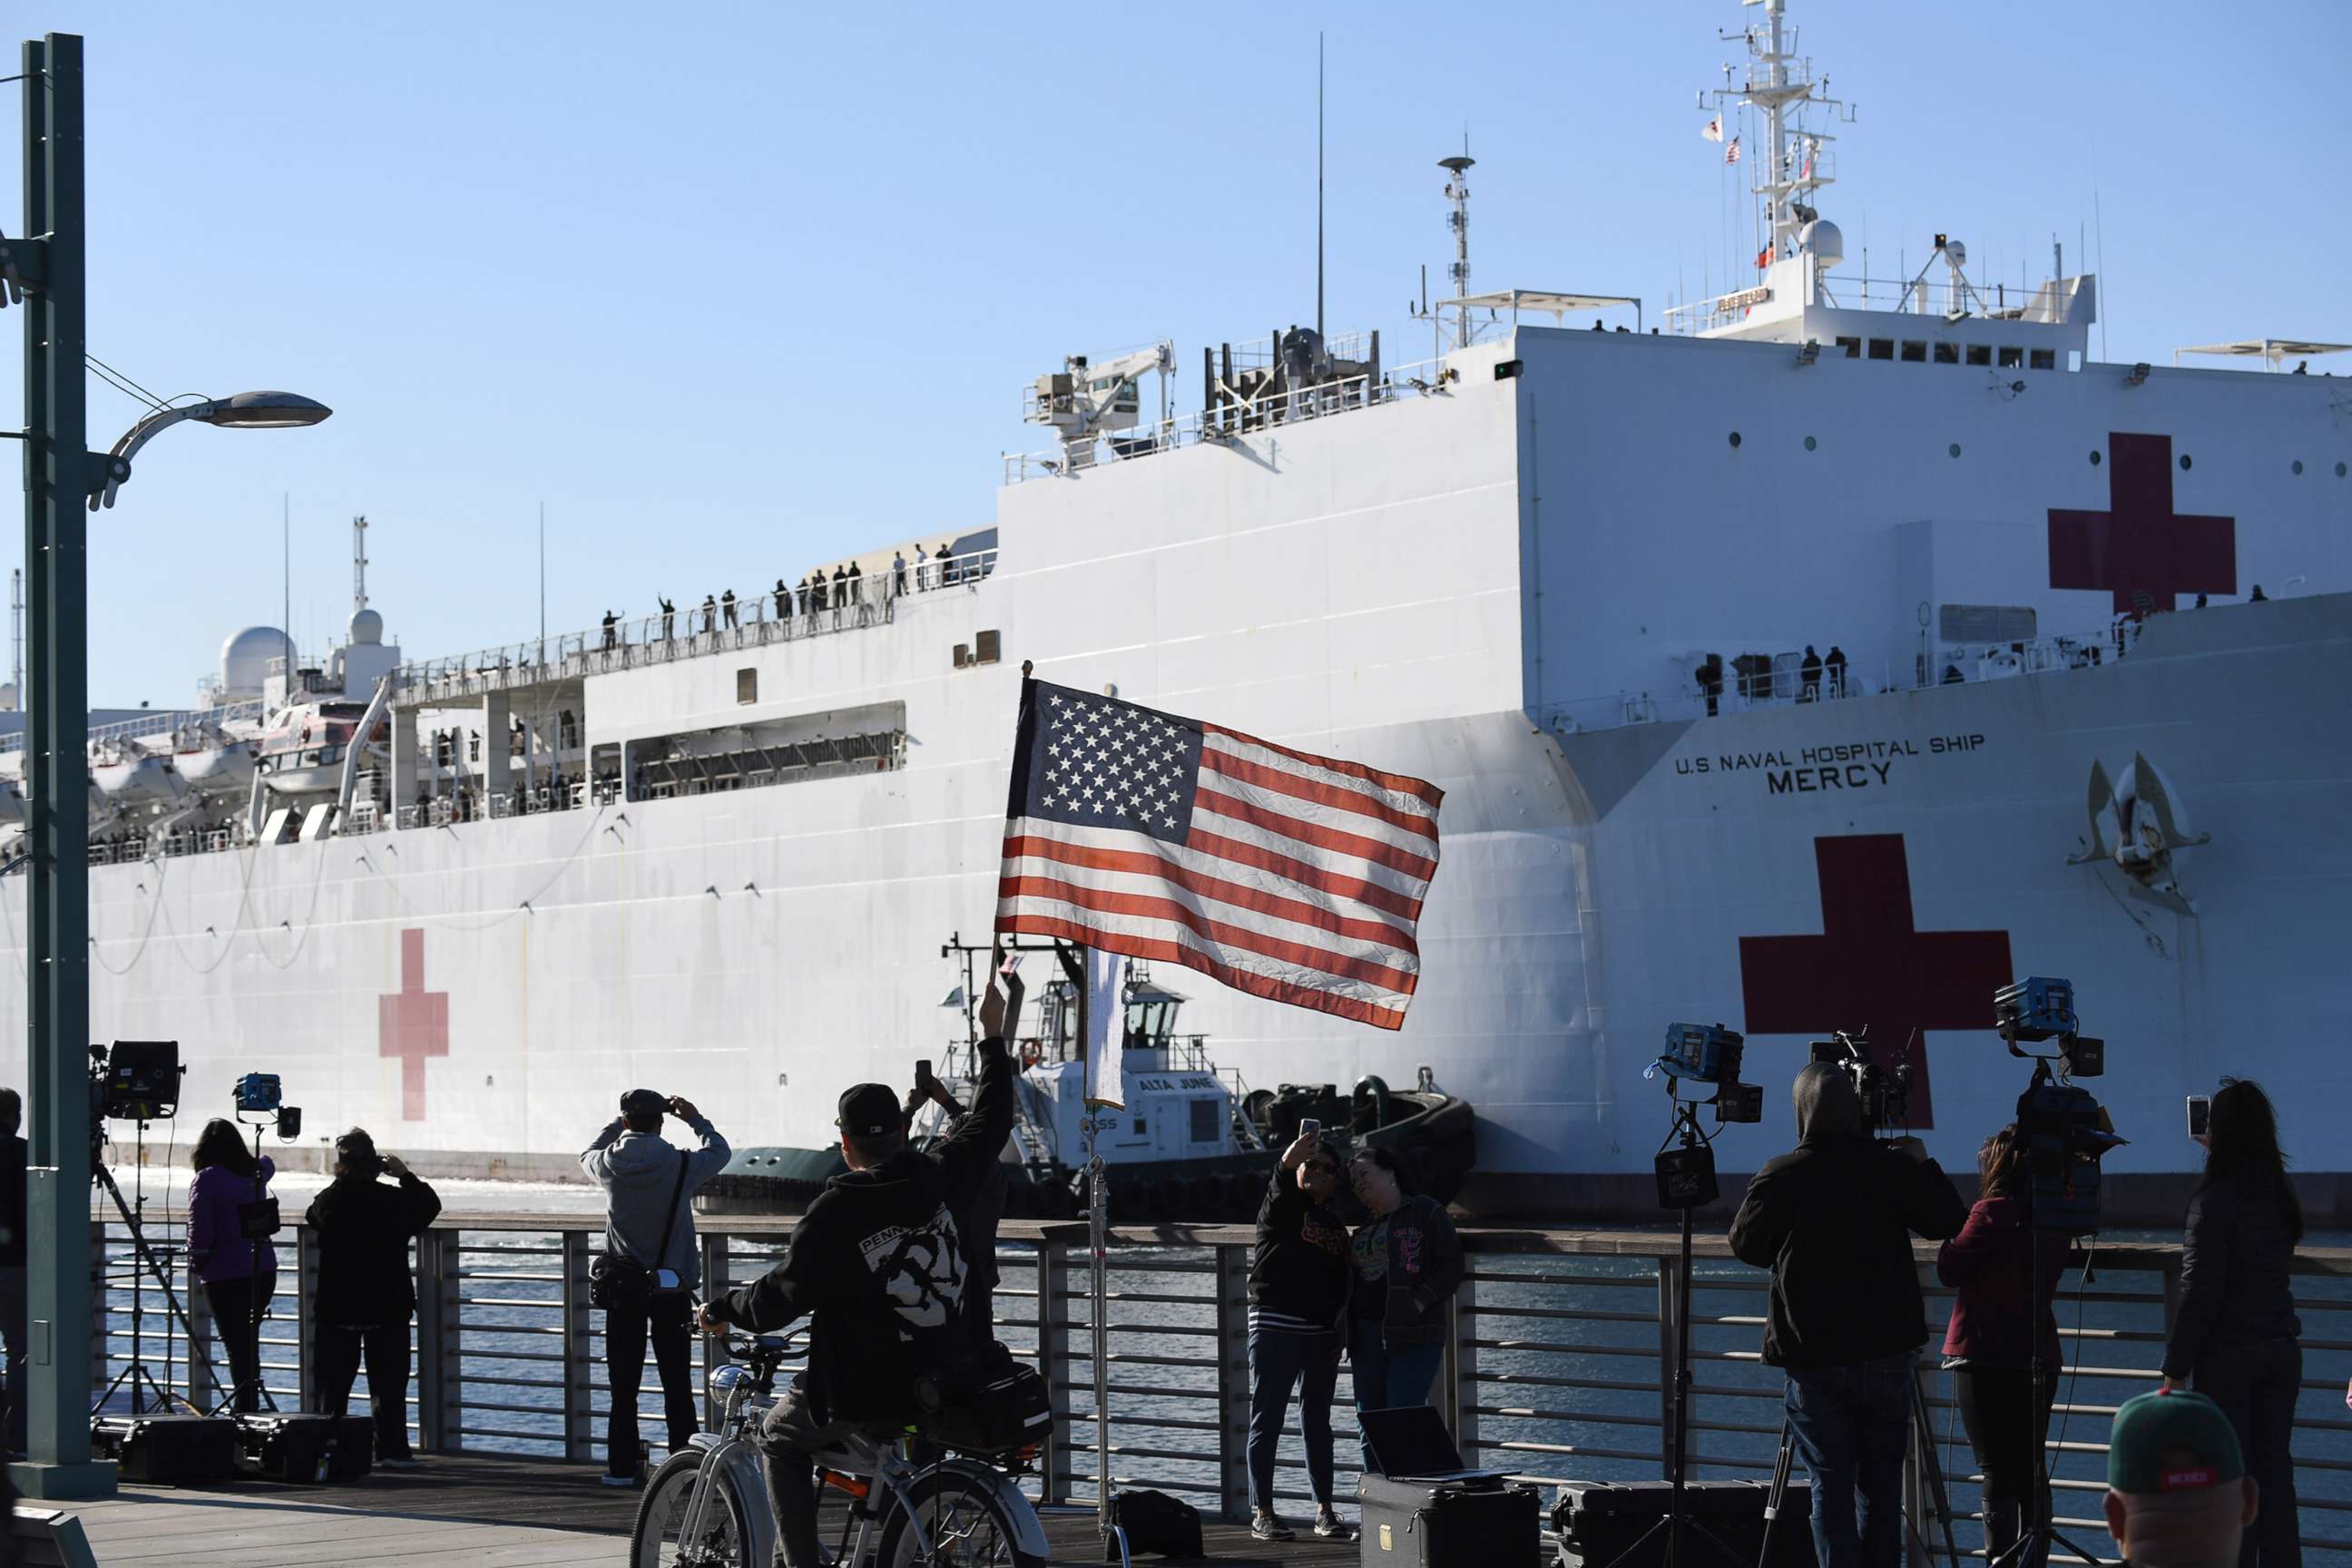 PHOTO: The U.S. Navy hospital ship Mercy arrives at the Port of Los Angeles, March 27, 2020, to help local hospitals amid the growing coronavirus crisis, in Los Angeles, Calif.